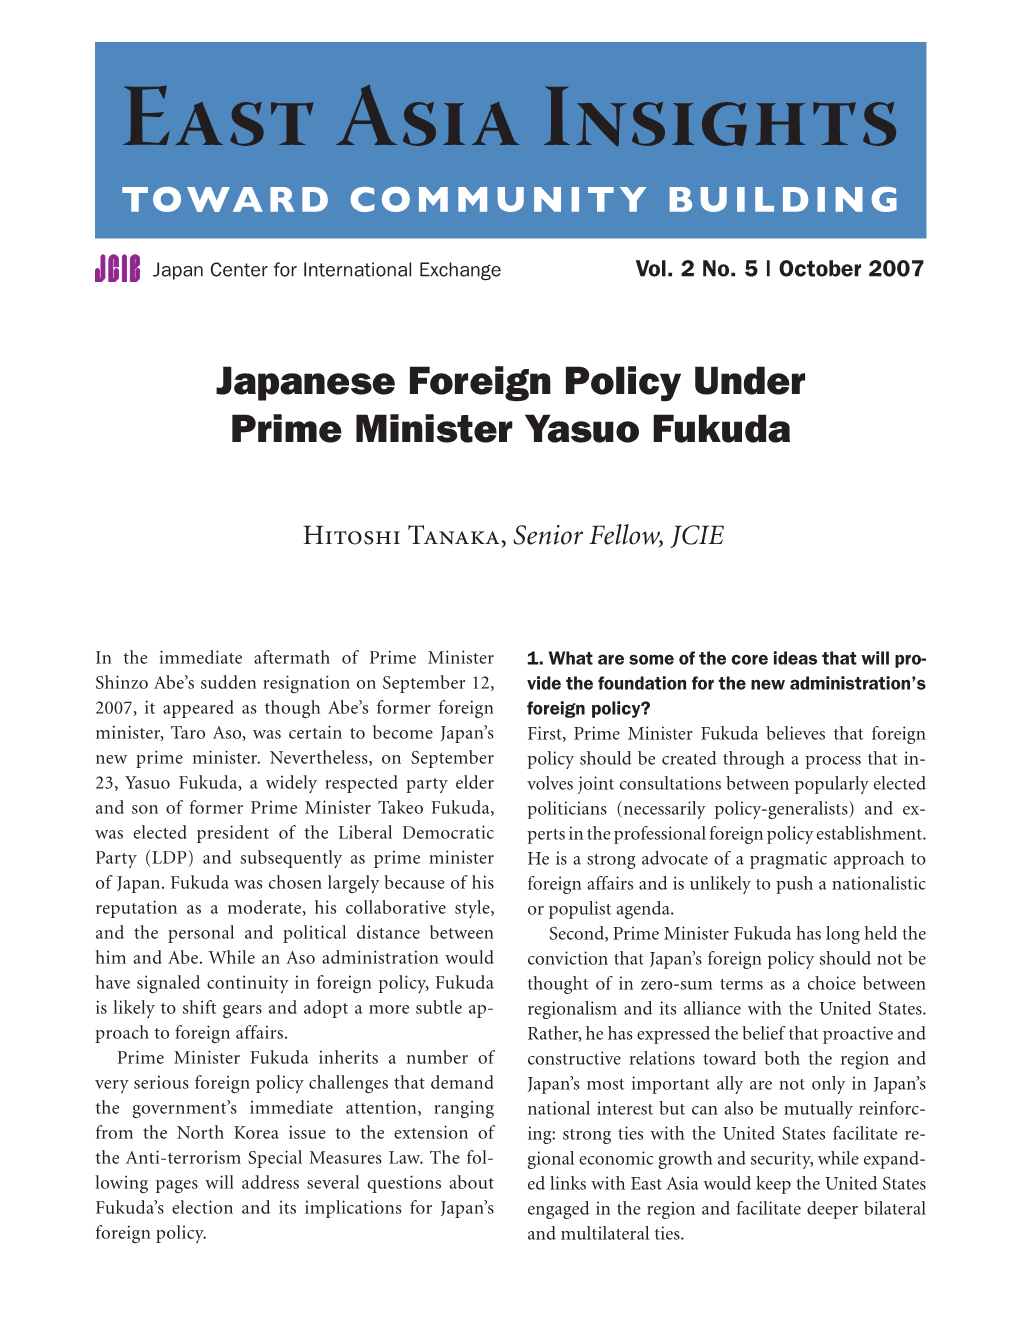 Japanese Foreign Policy Under Prime Minister Yasuo Fukuda